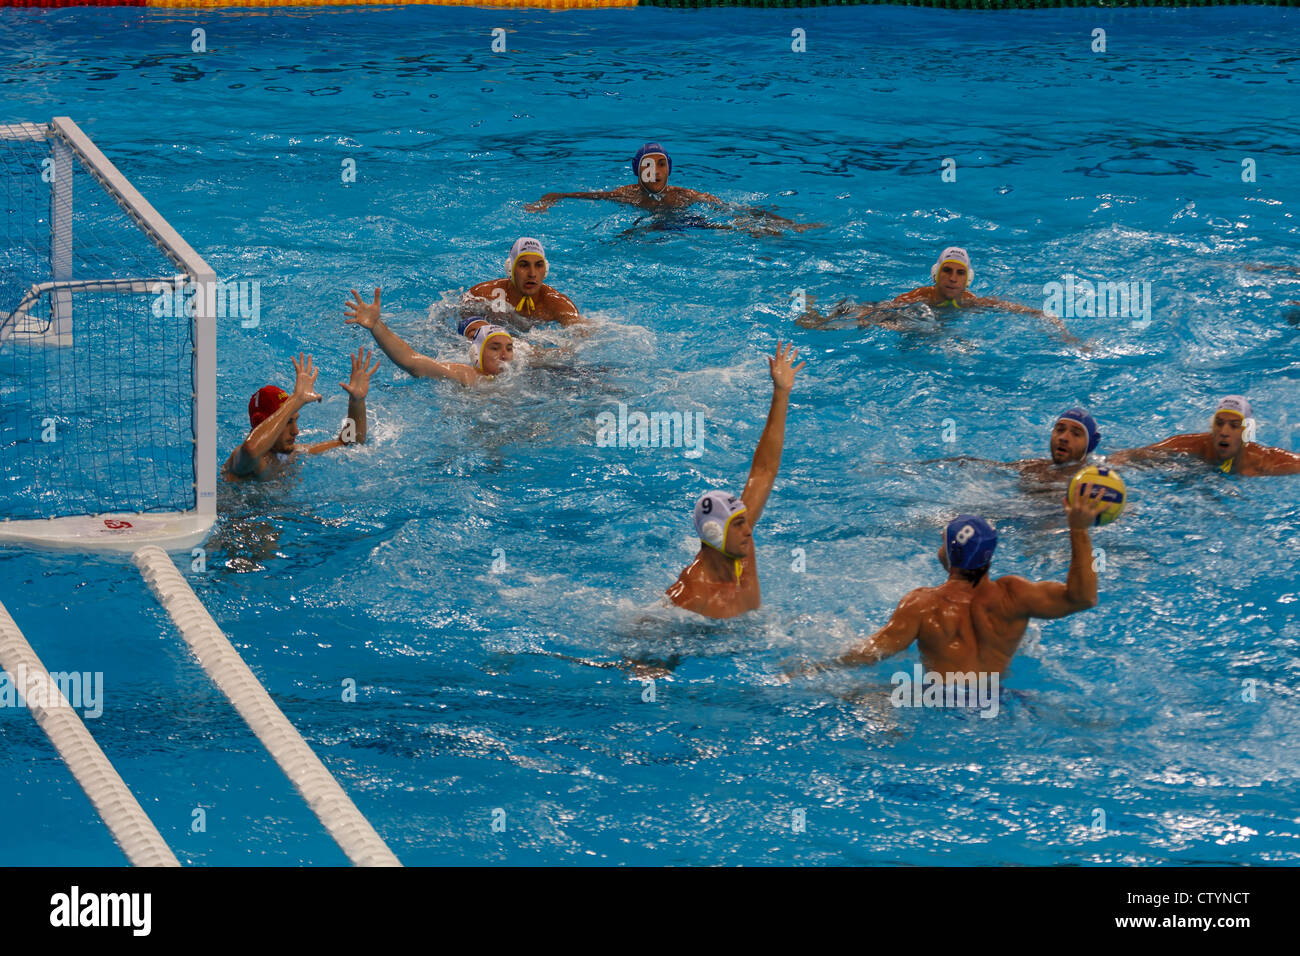 https://c8.alamy.com/compde/ctynct/olympische-sommerspiele-wasser-polo-match-in-water-cube-stadium-am-22-august-2008-in-peking-china-ctynct.jpg